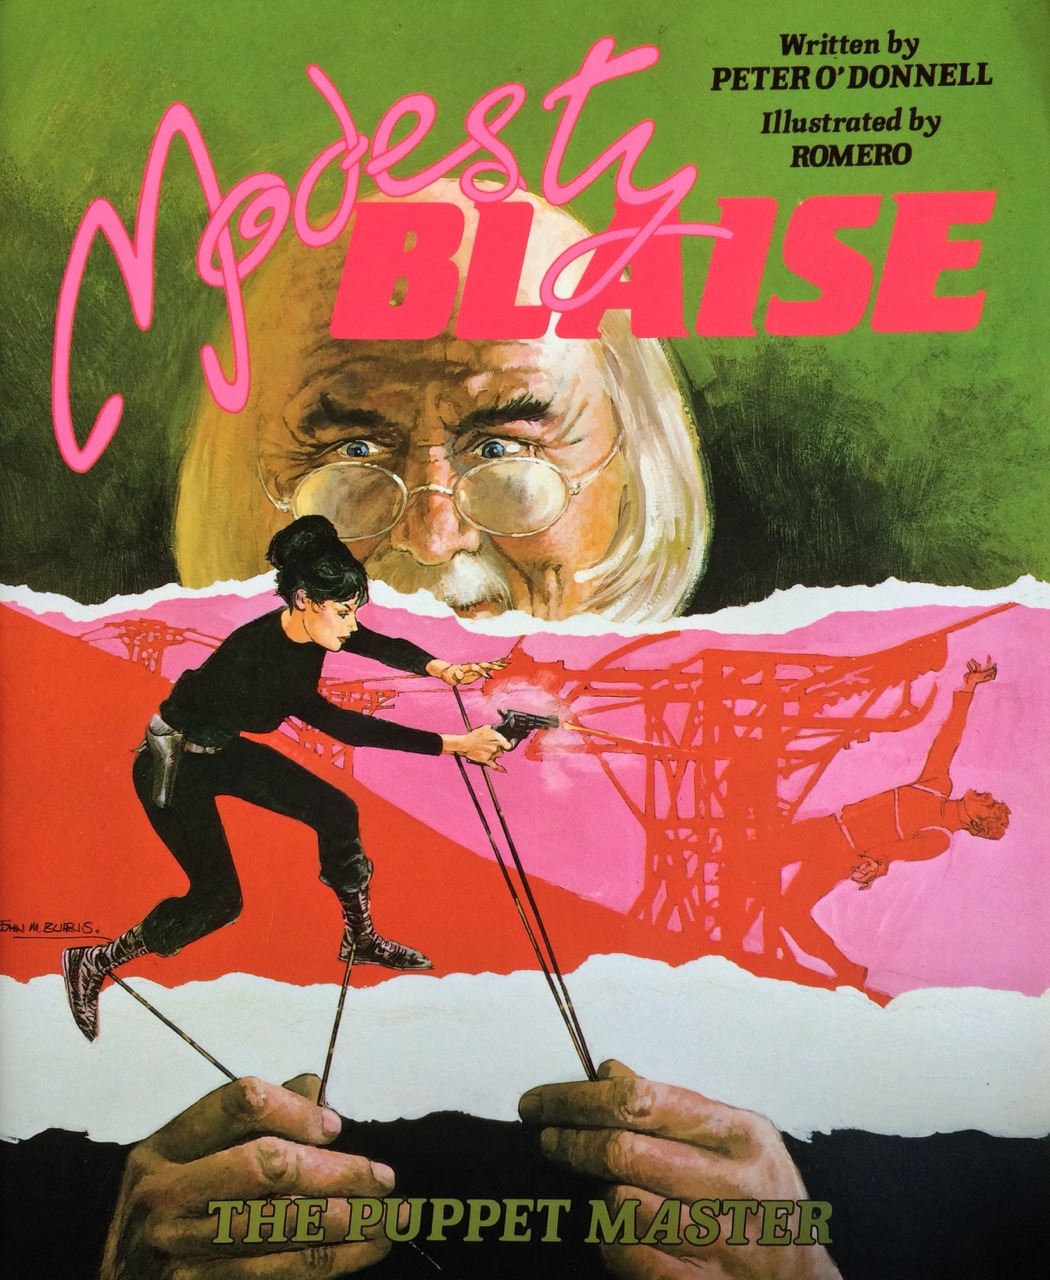 Modesty Blaise: The Puppet Master, written by Peter O’Donnell, illustrated by Romero